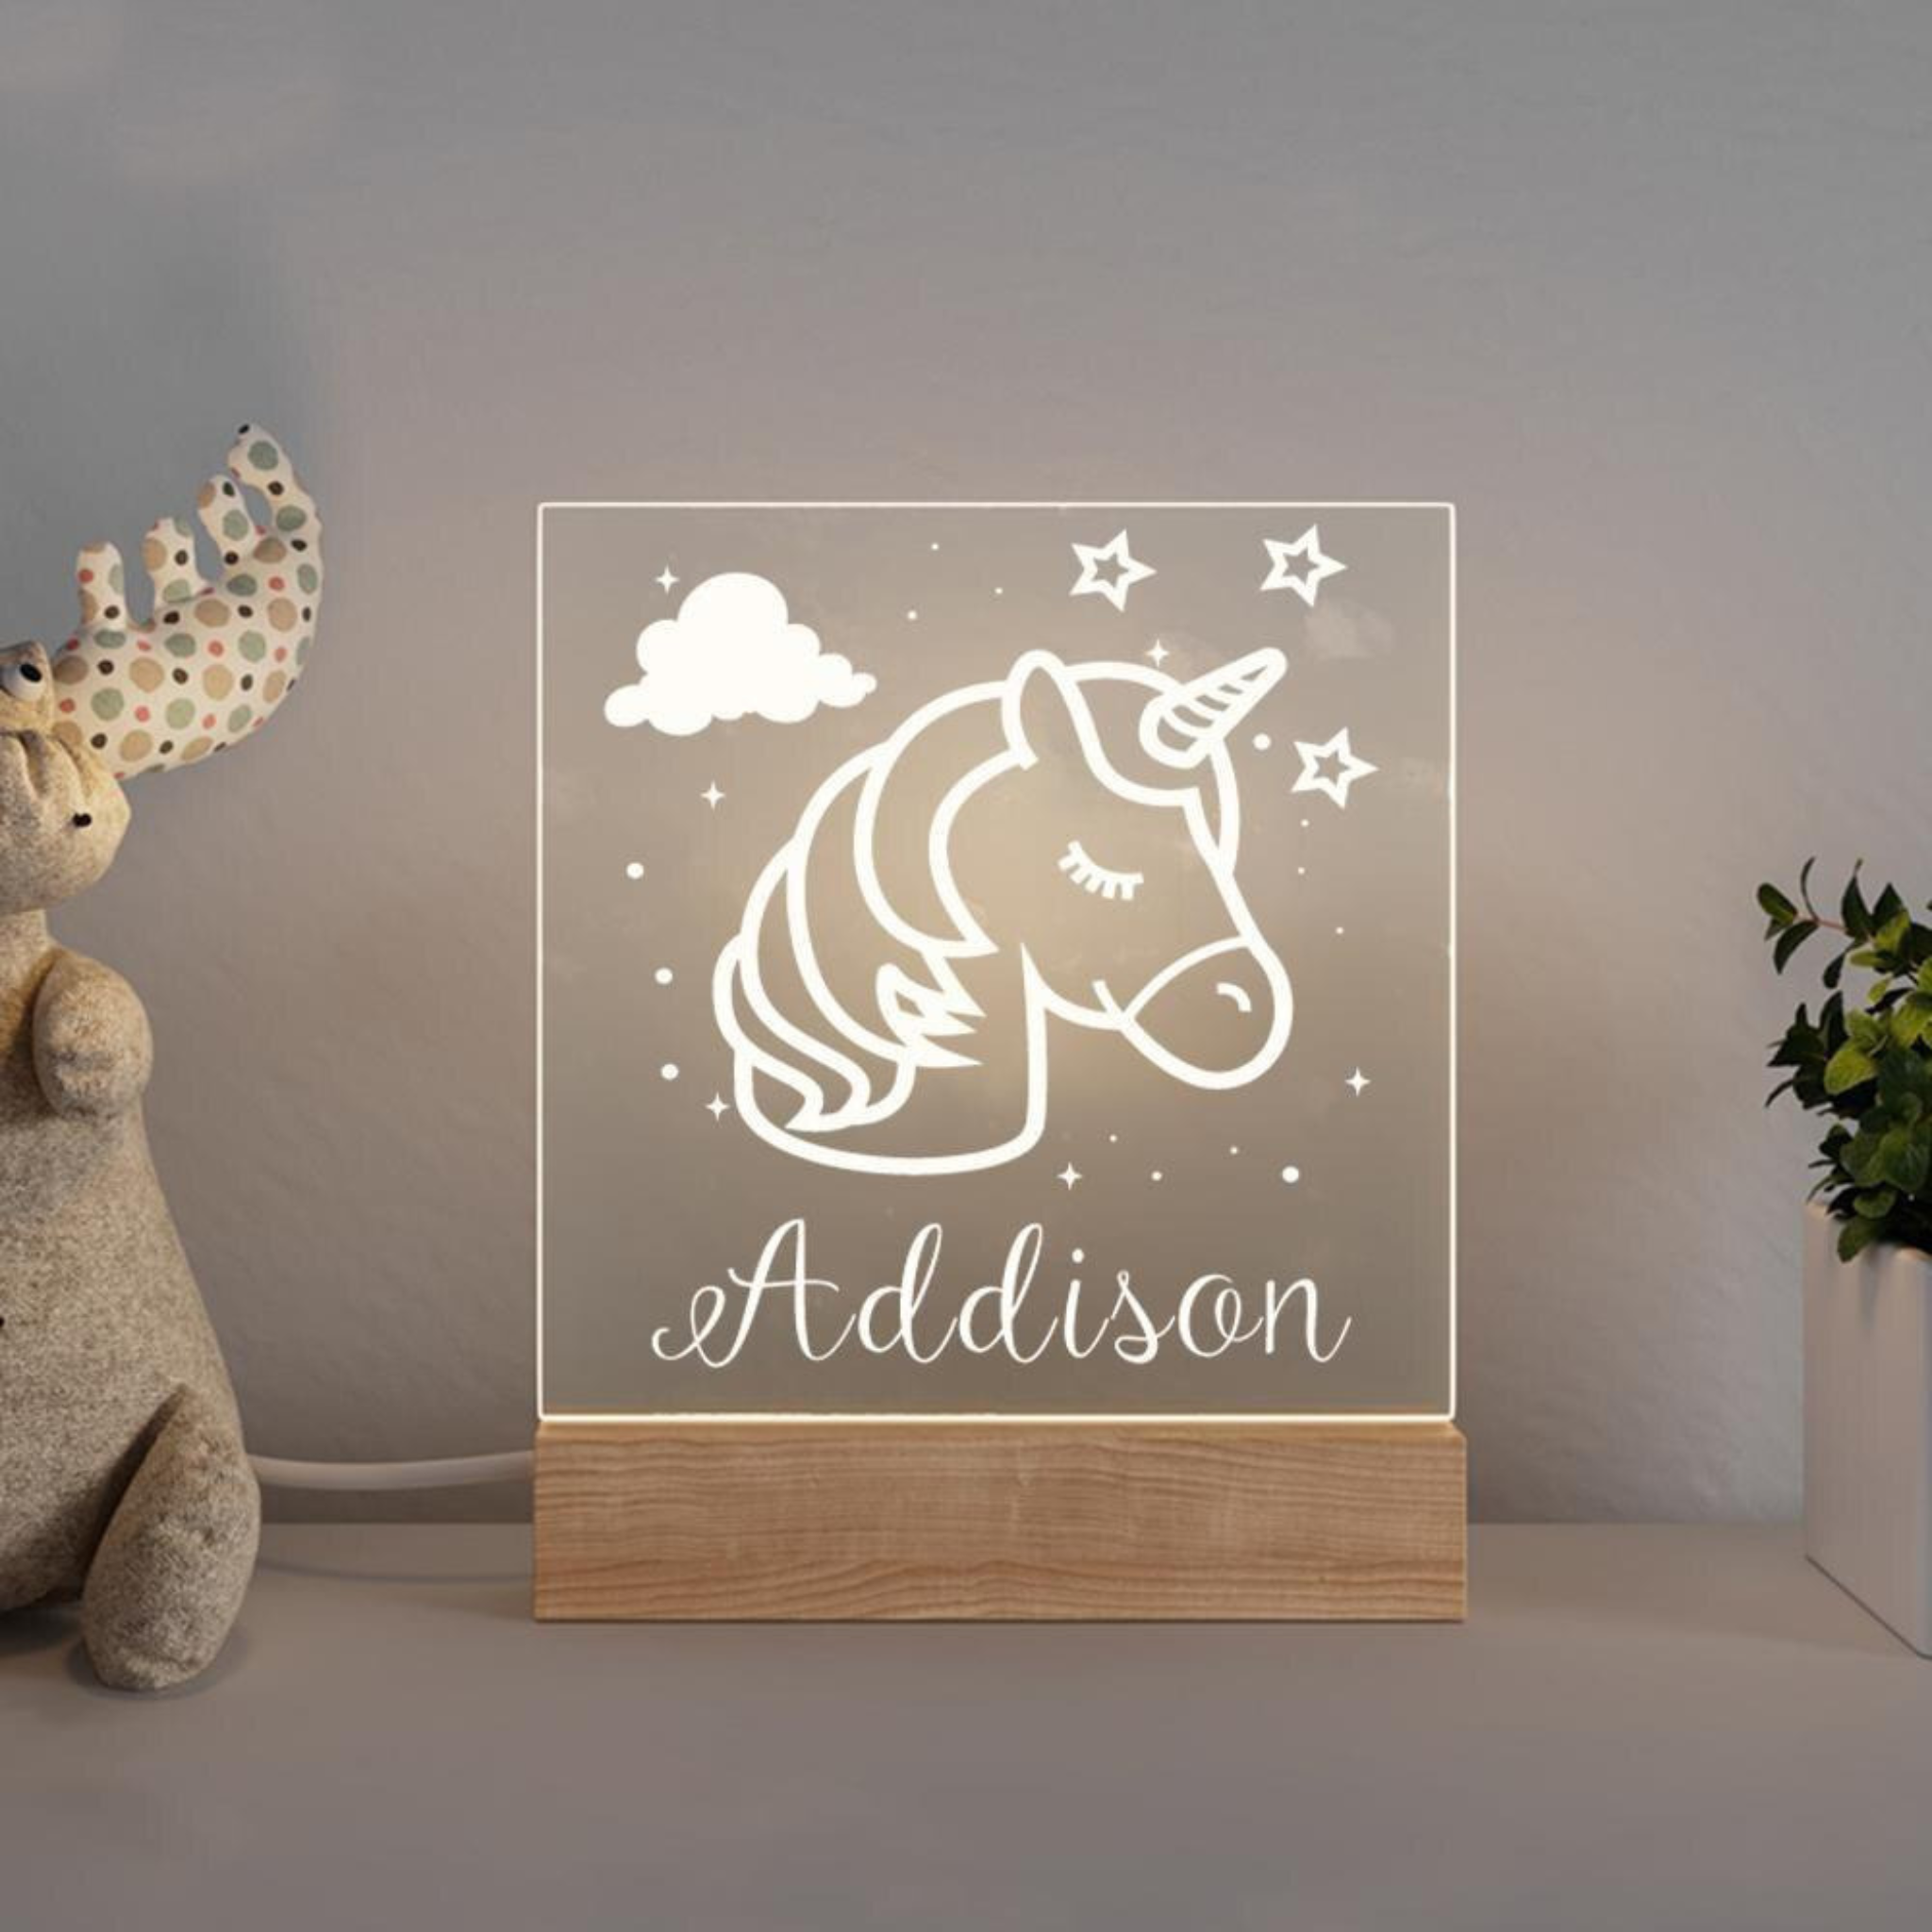 Unicorn personalized night light lit up in a nursery room.